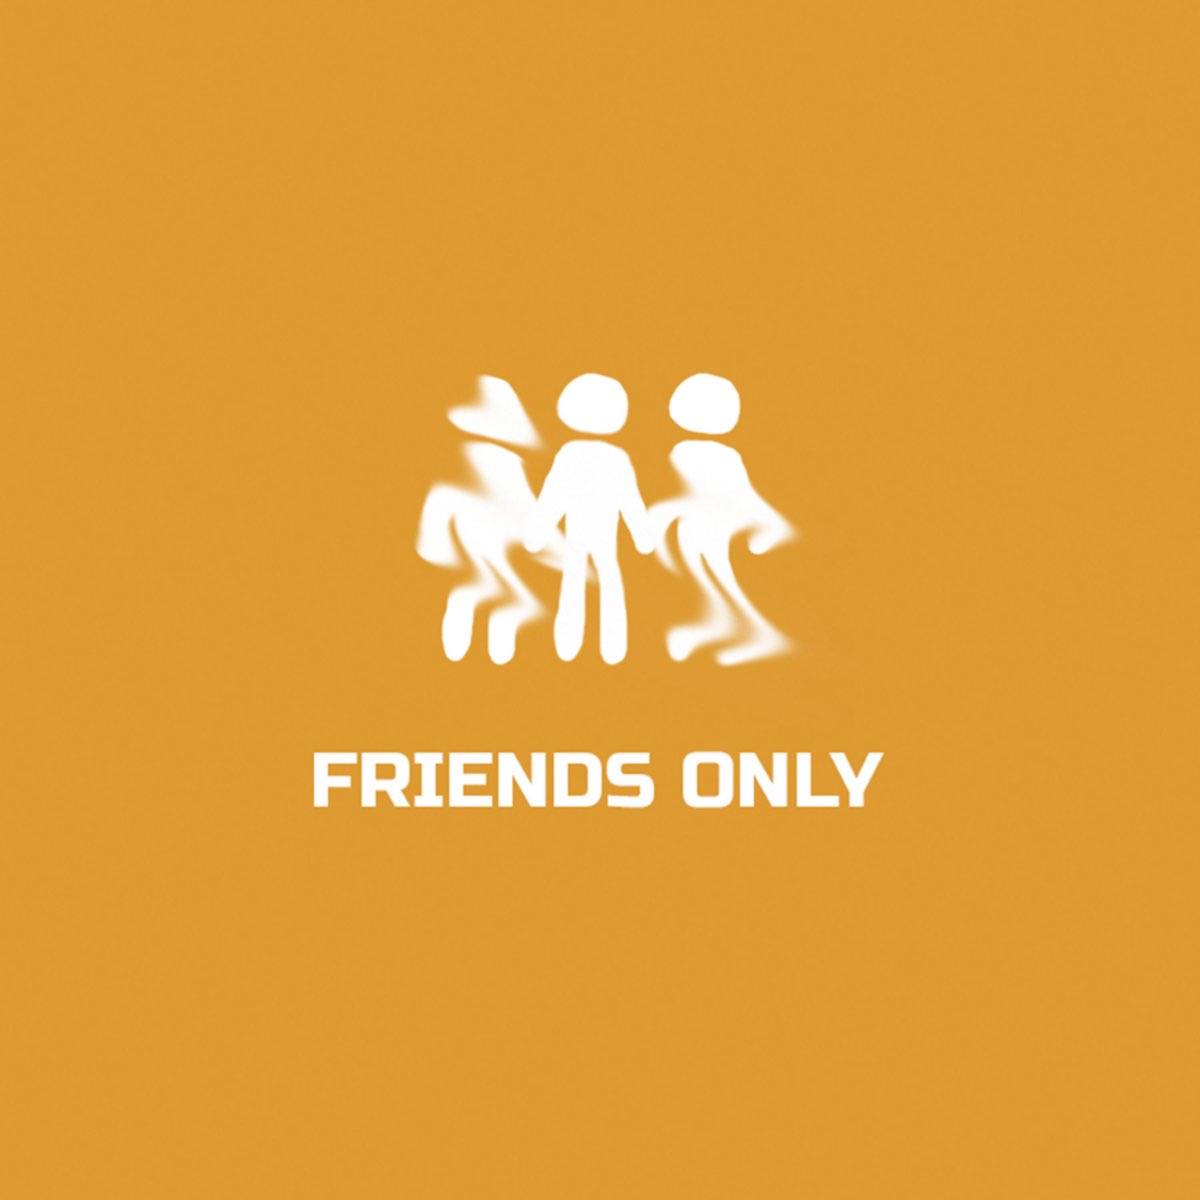 Онли френдс. Only friends. Be only friends. Compilation only